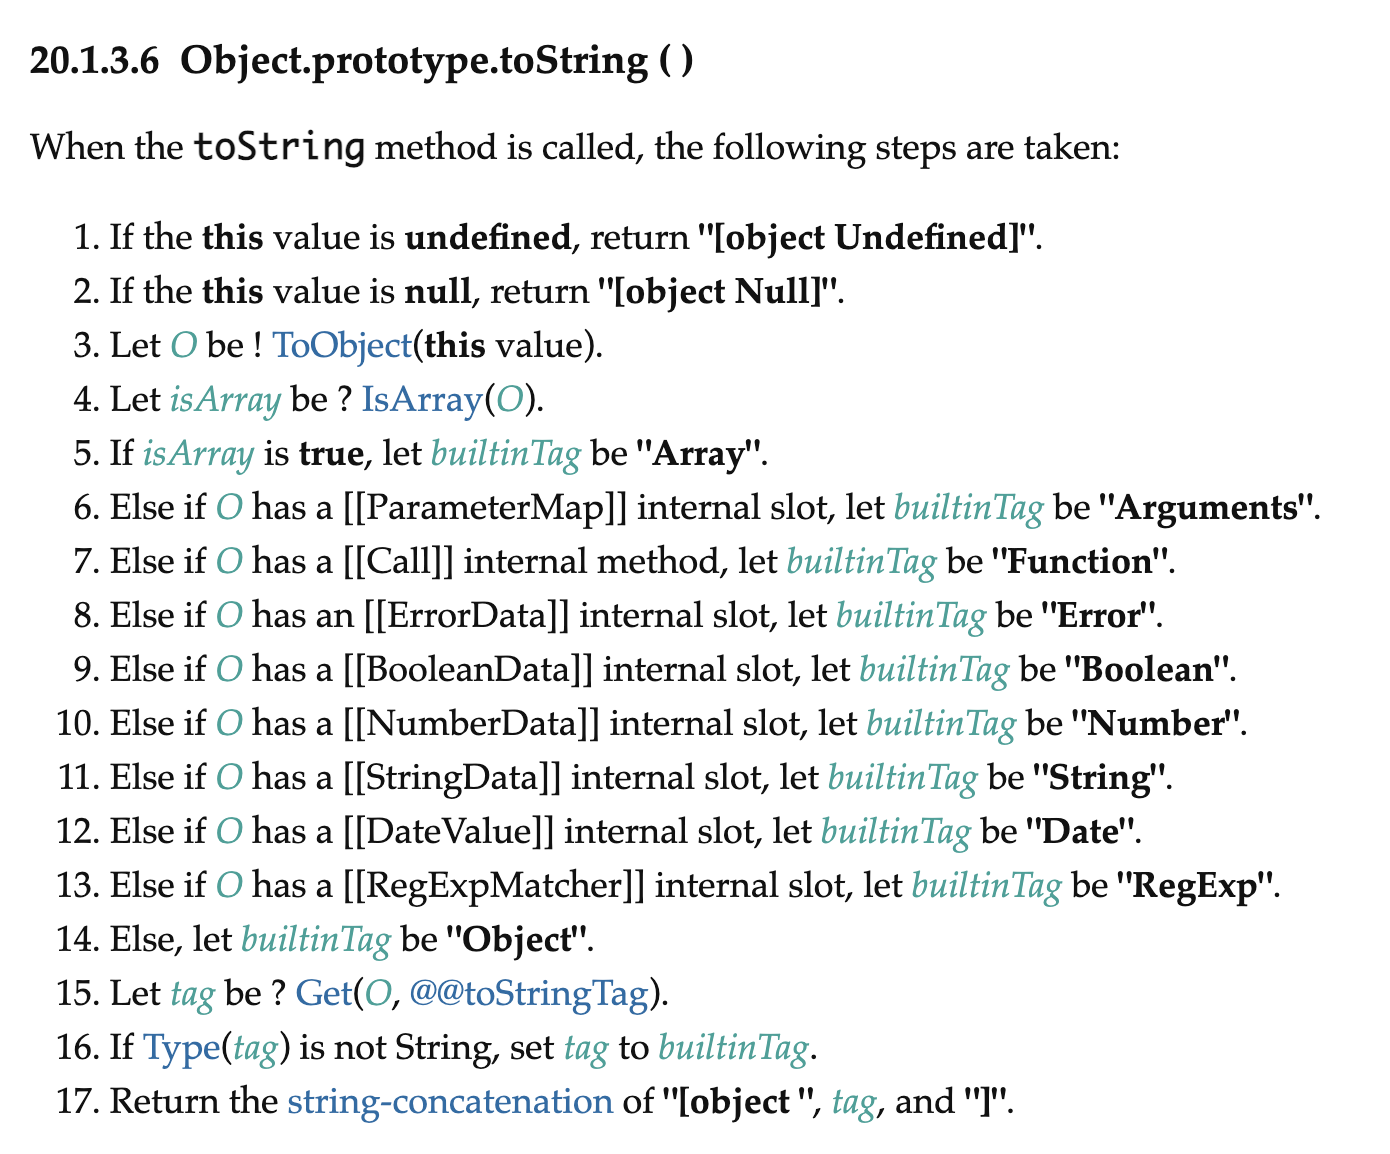 Object.prototype.toString